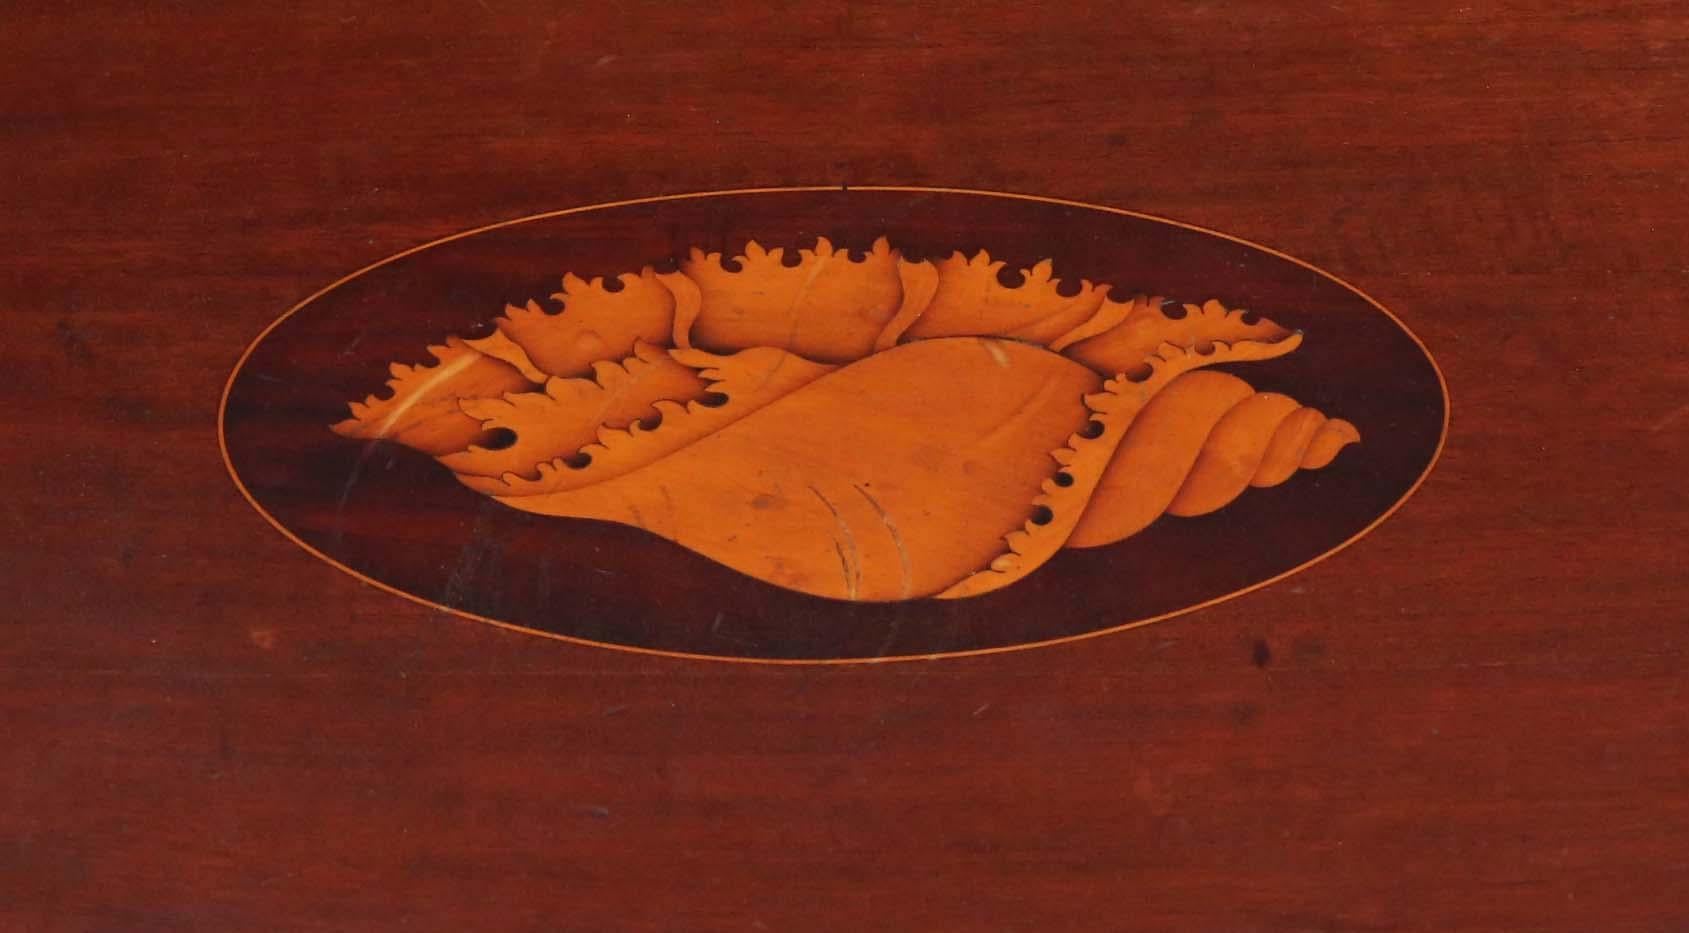 Antique quality 19th century inlaid mahogany oval serving tea tray.

A great quality tray with brass handles. Sought after shell design.

Very attractive, with lovely proportions and styling.

Desirable oval shape, with marquetry